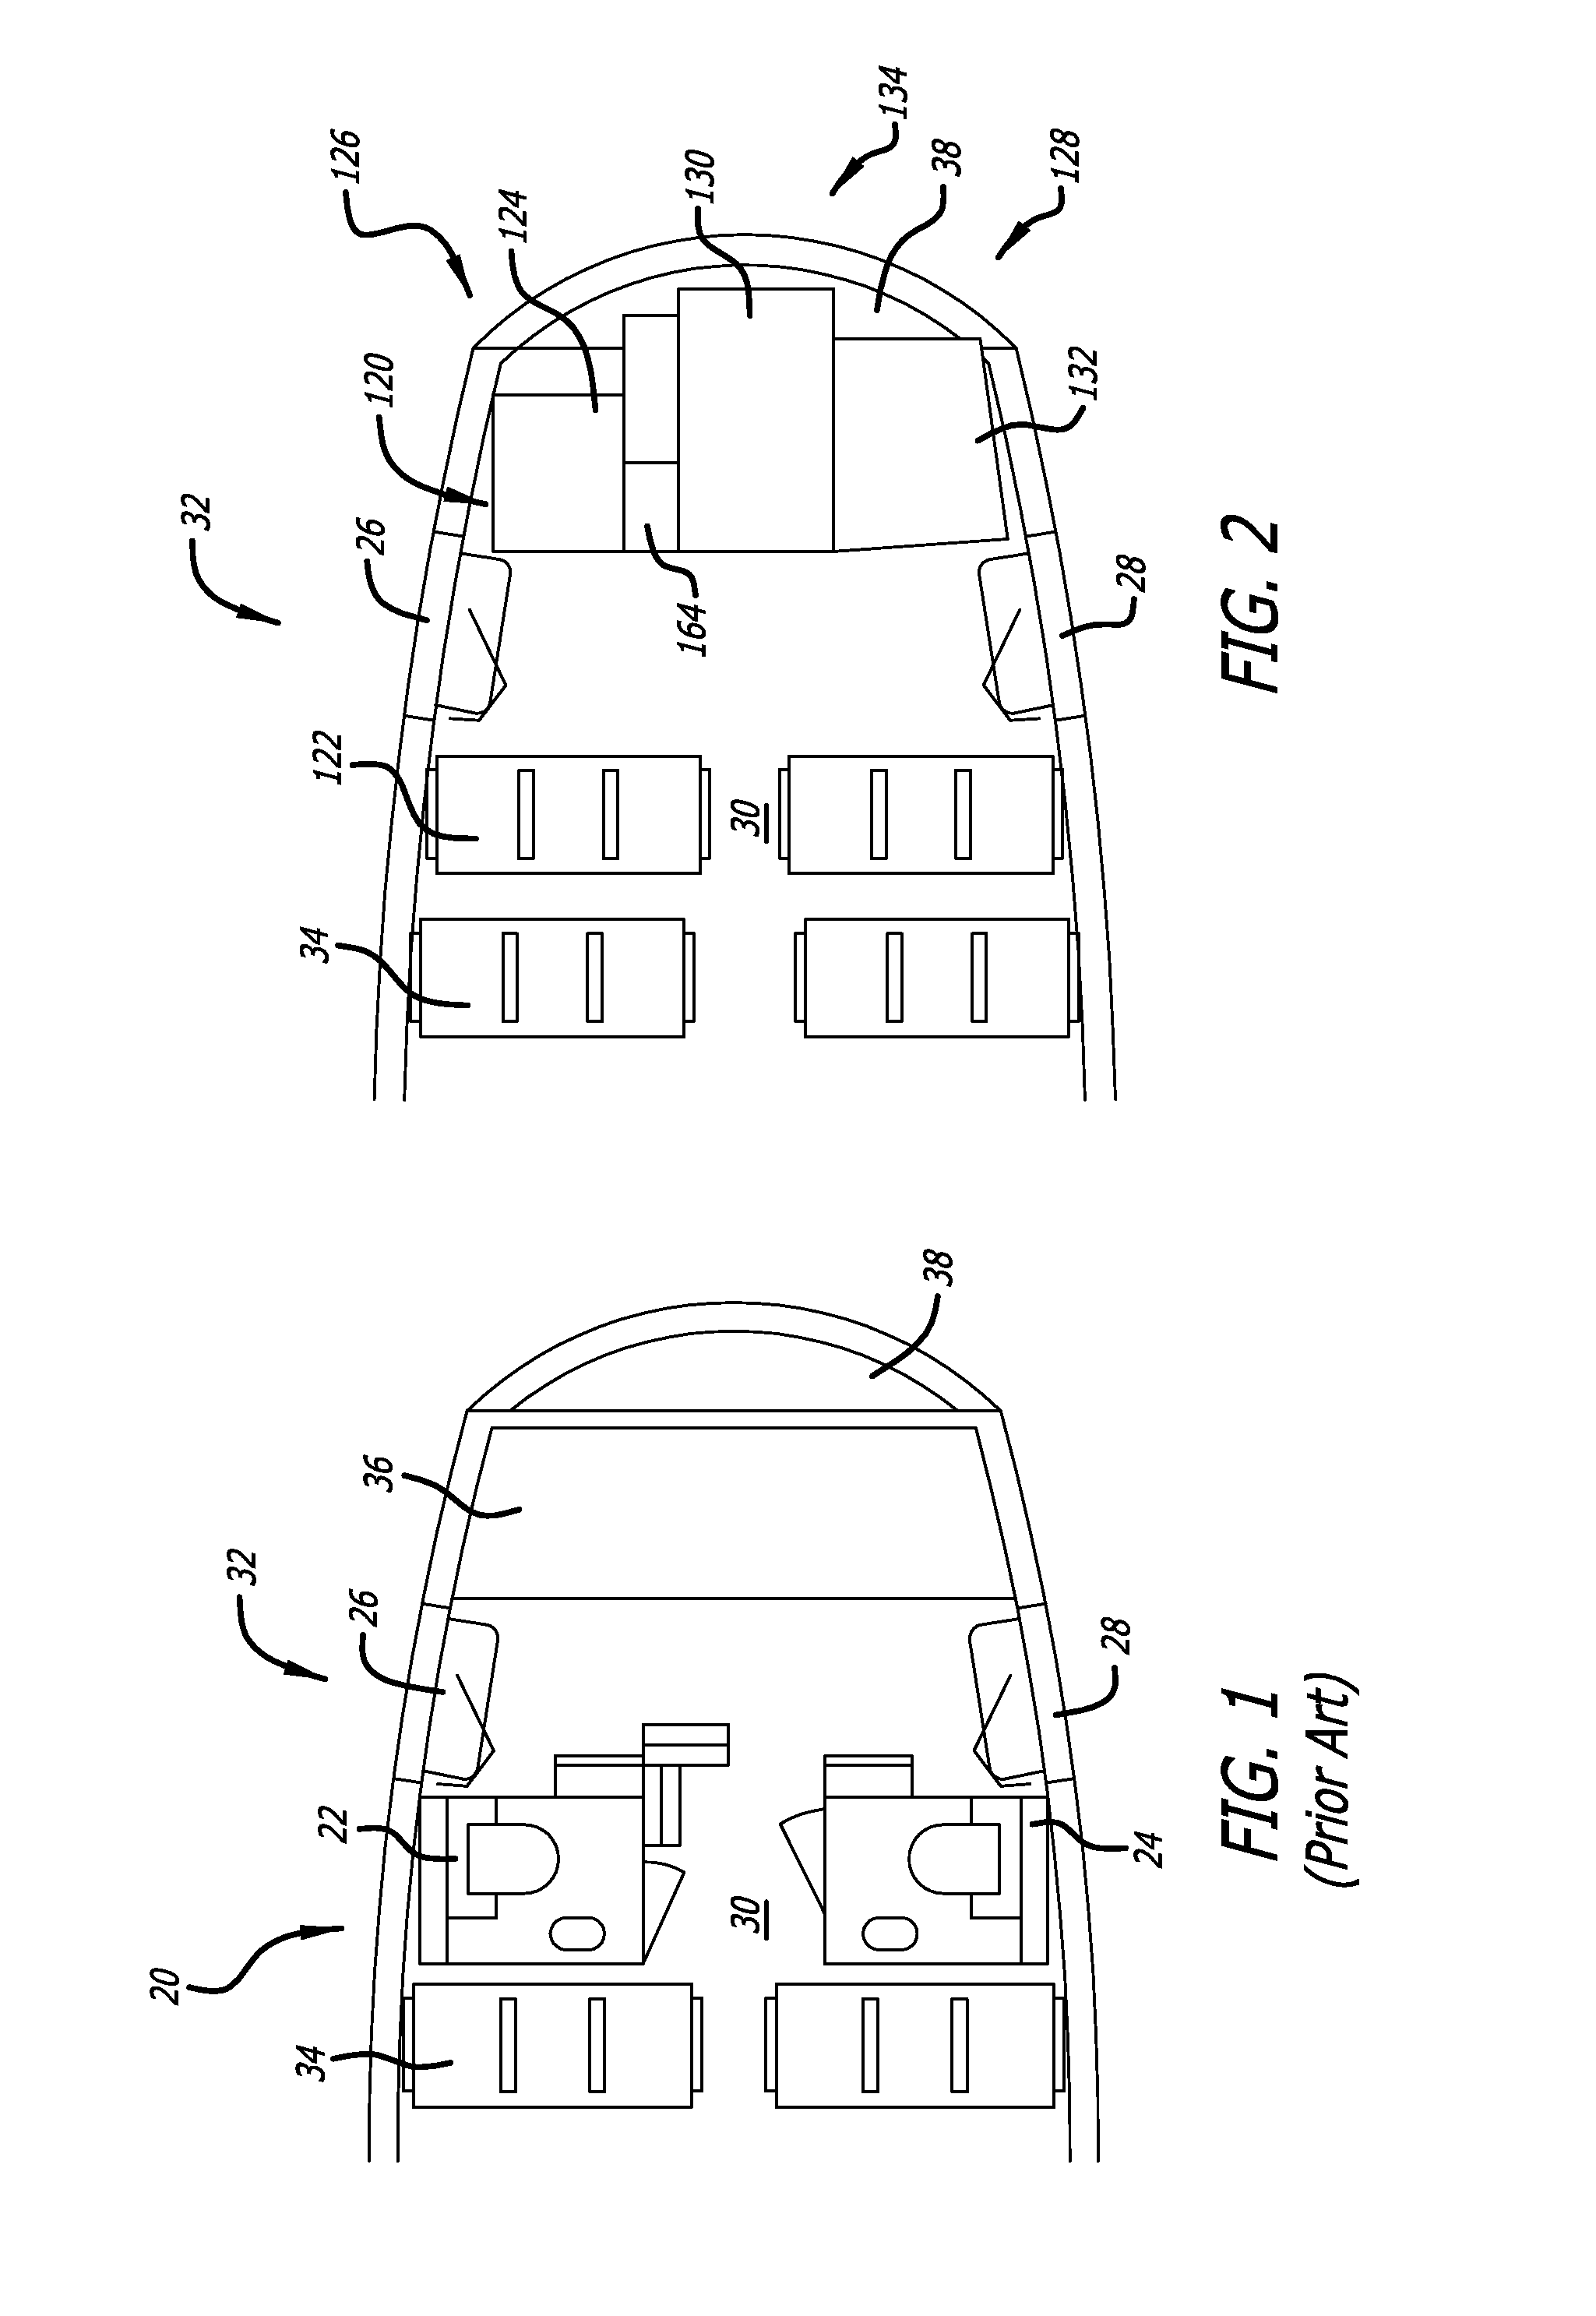 Compact aircraft galley and lavatory arrangement and articulating lavatory partition for an aircraft